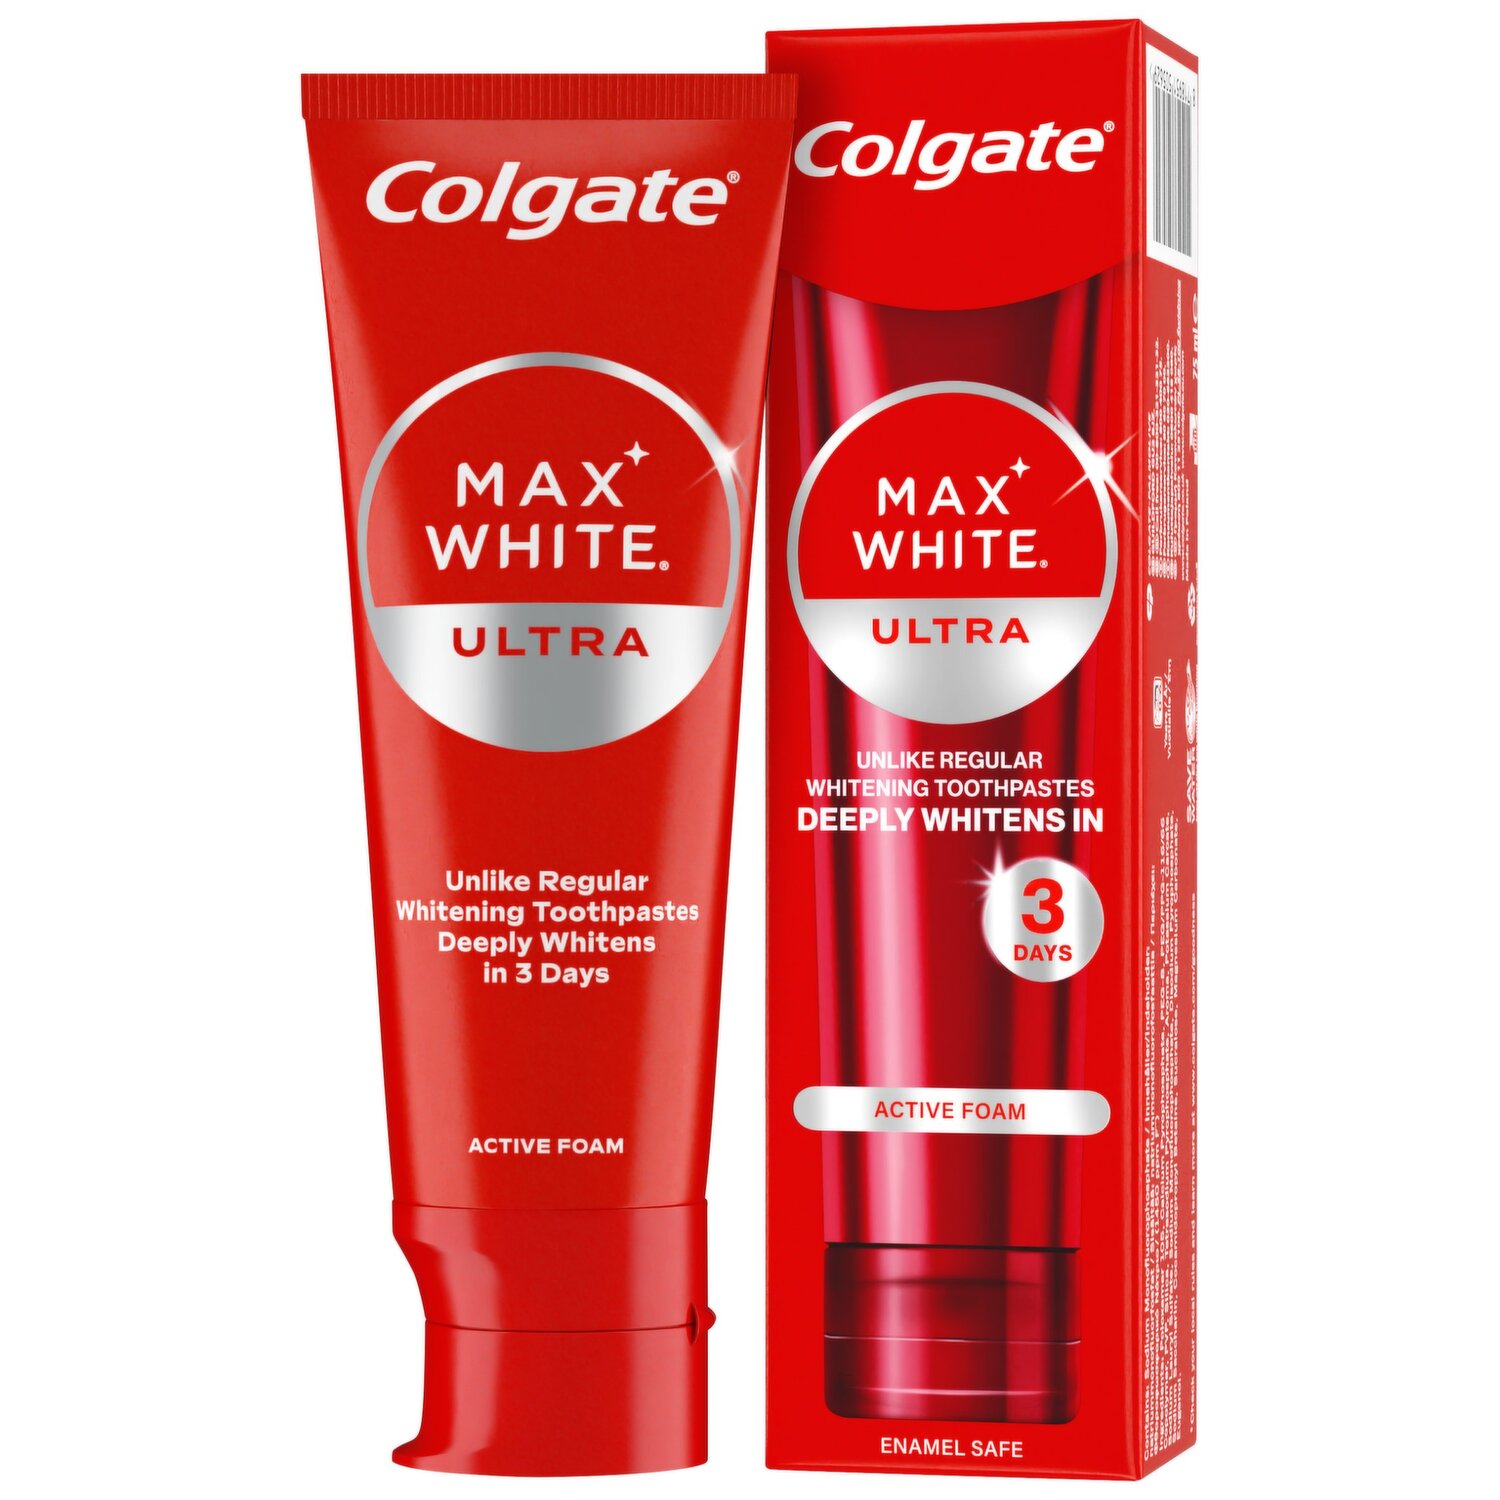 NEWVIDEO 3 DAY TRIAL OF @Colgate MAX WHITE ULTRA TOOTHPASTE